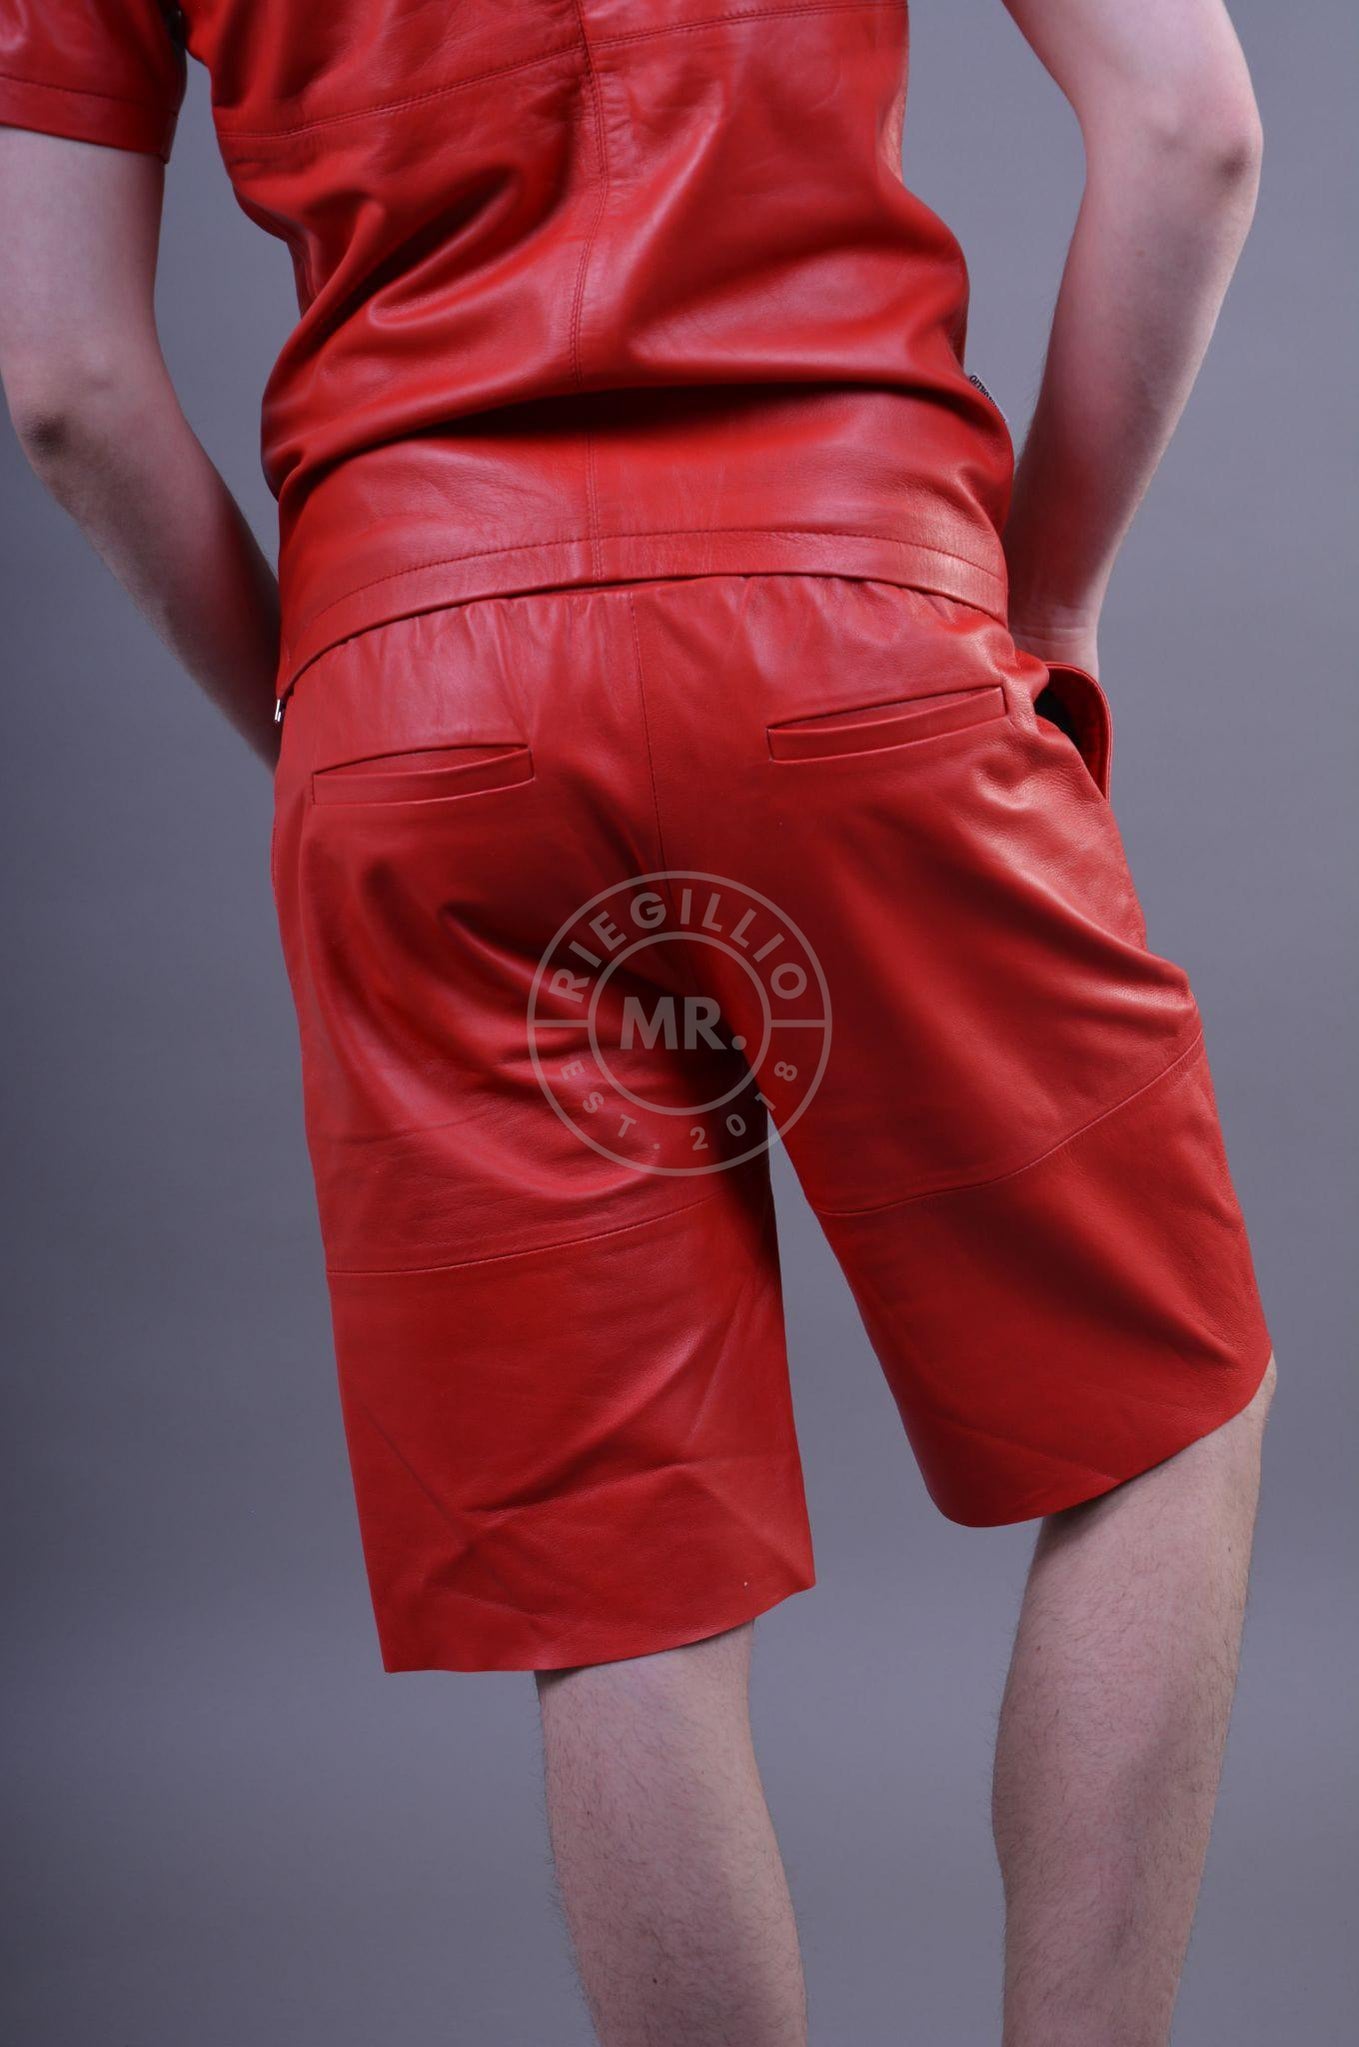 Red Leather Long Short at MR. Riegillio